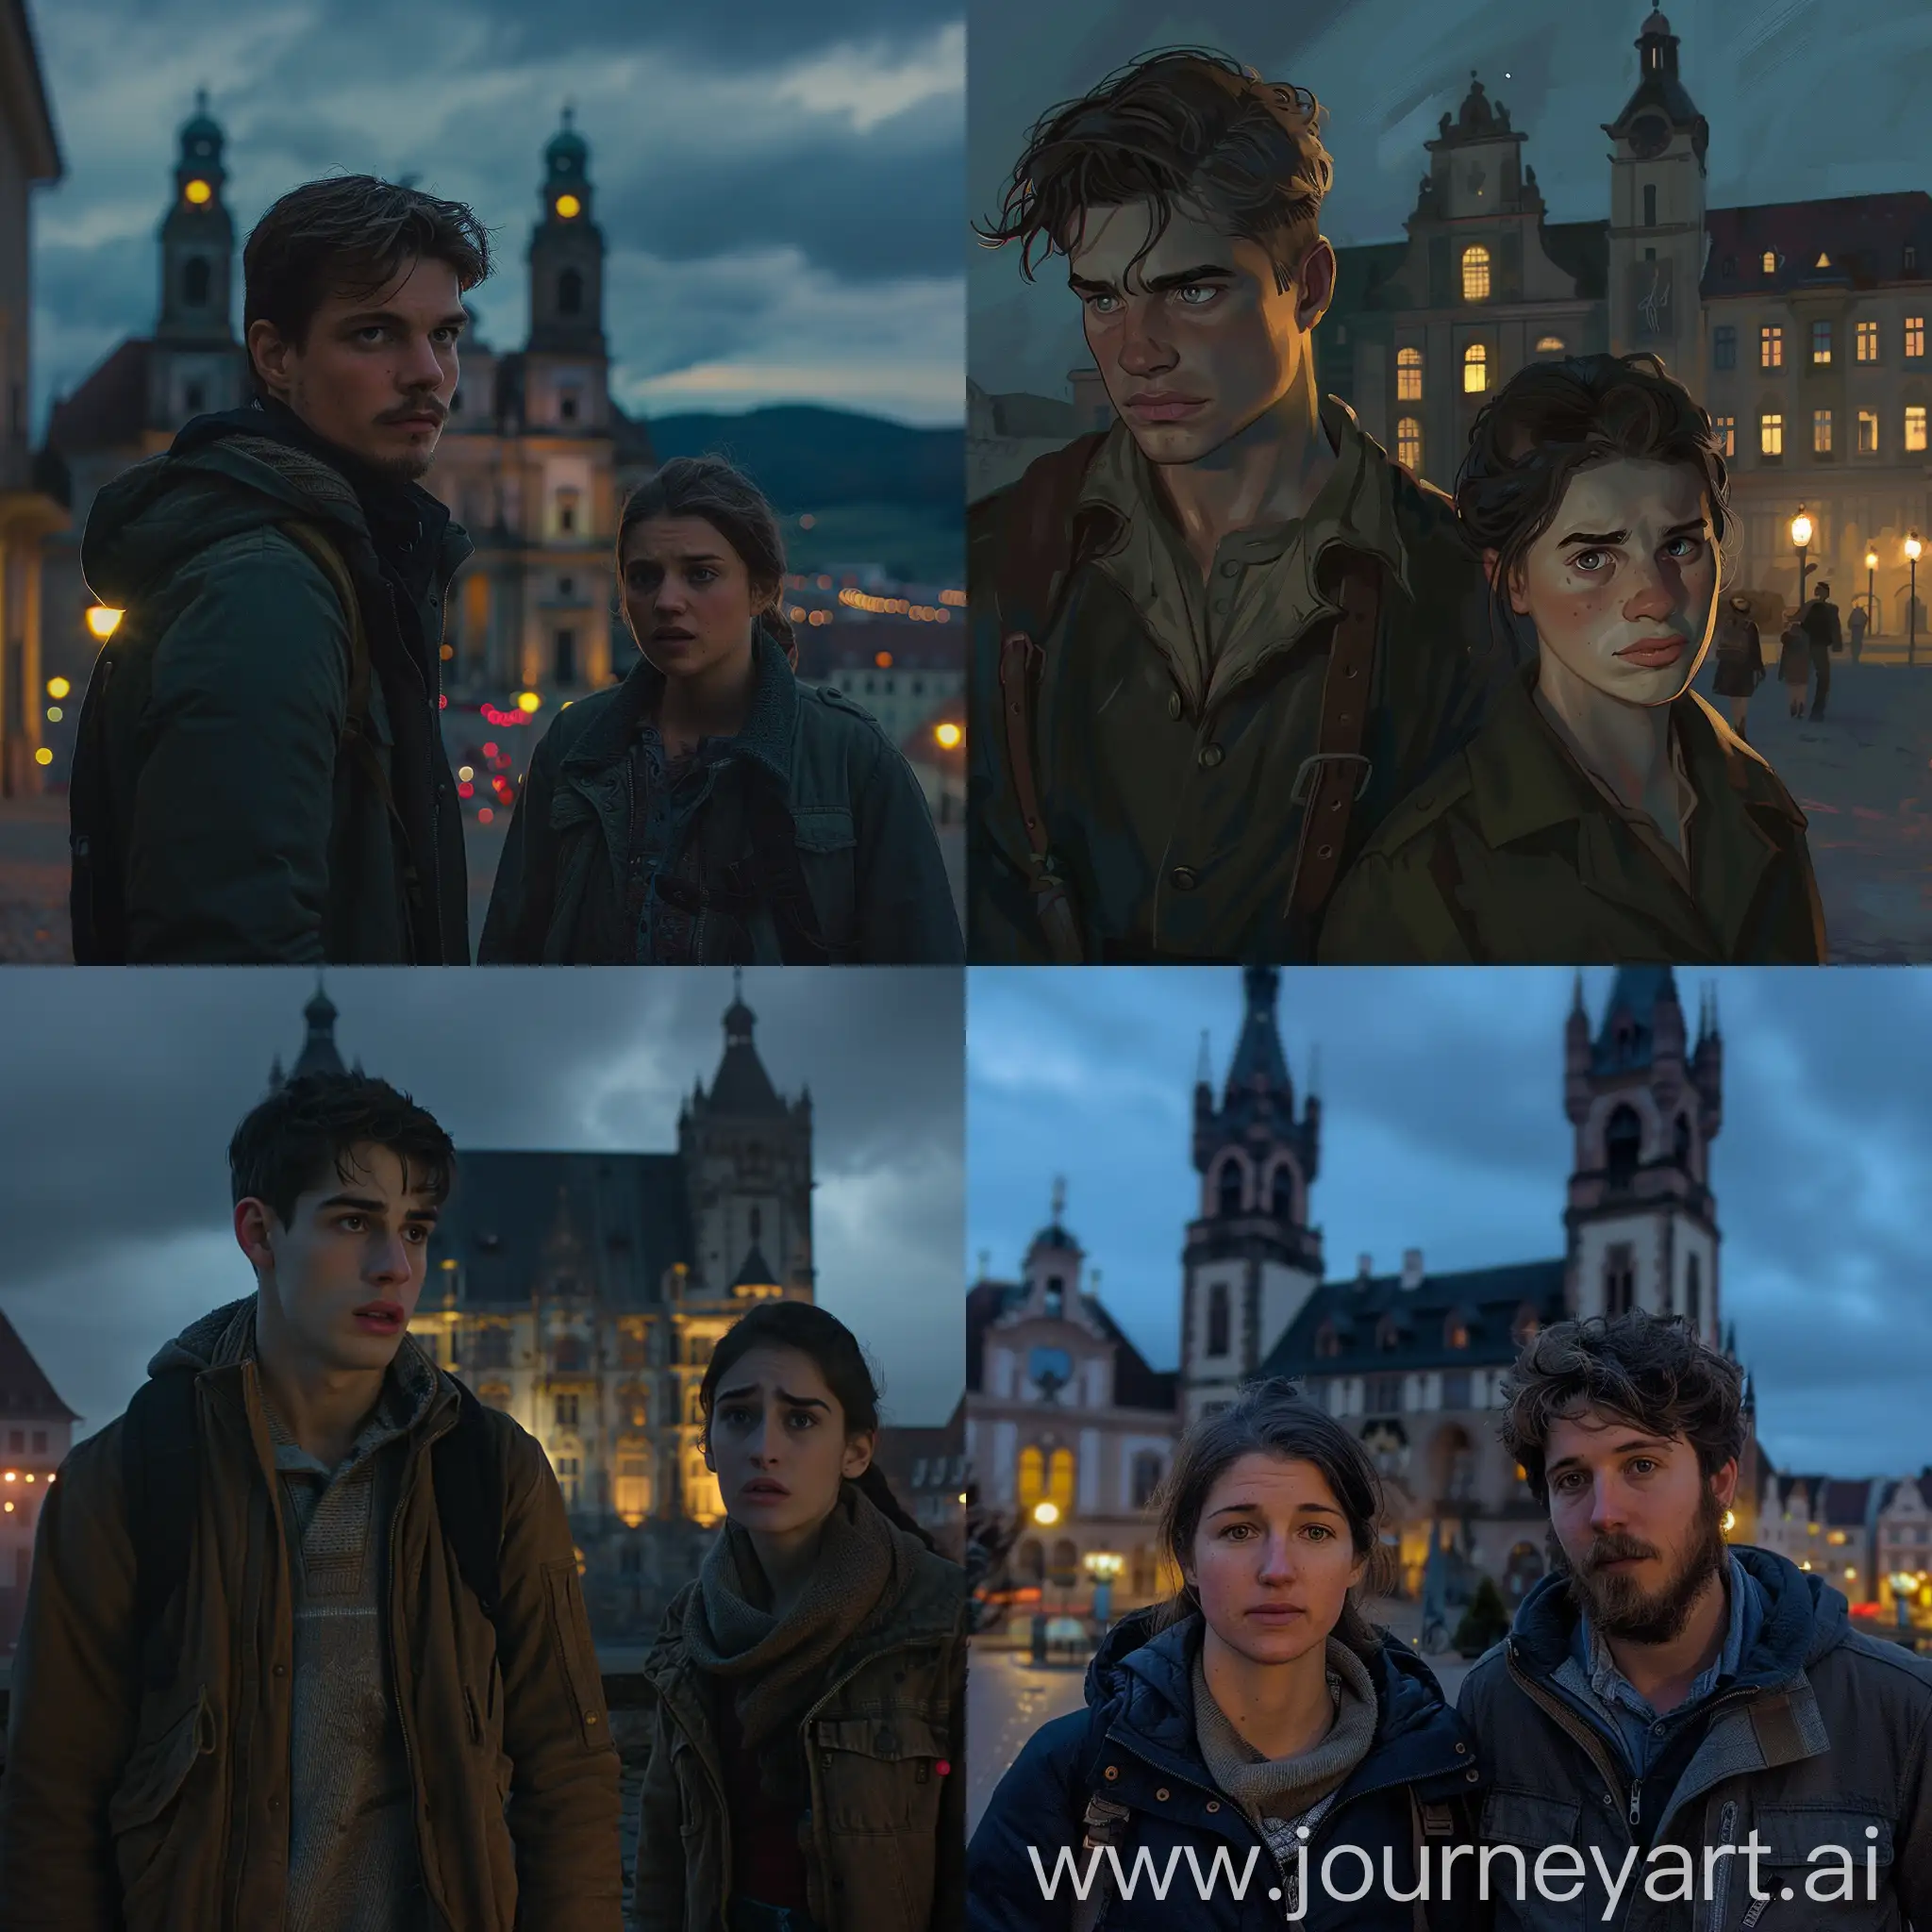 - Dusk in front of the imposing town hall of Penzberg.

- Schorsch and Marie stand in front of the town hall, the lights of the city can be seen in the distance.

- Schorsch has a thoughtful look, while Marie seems worried.